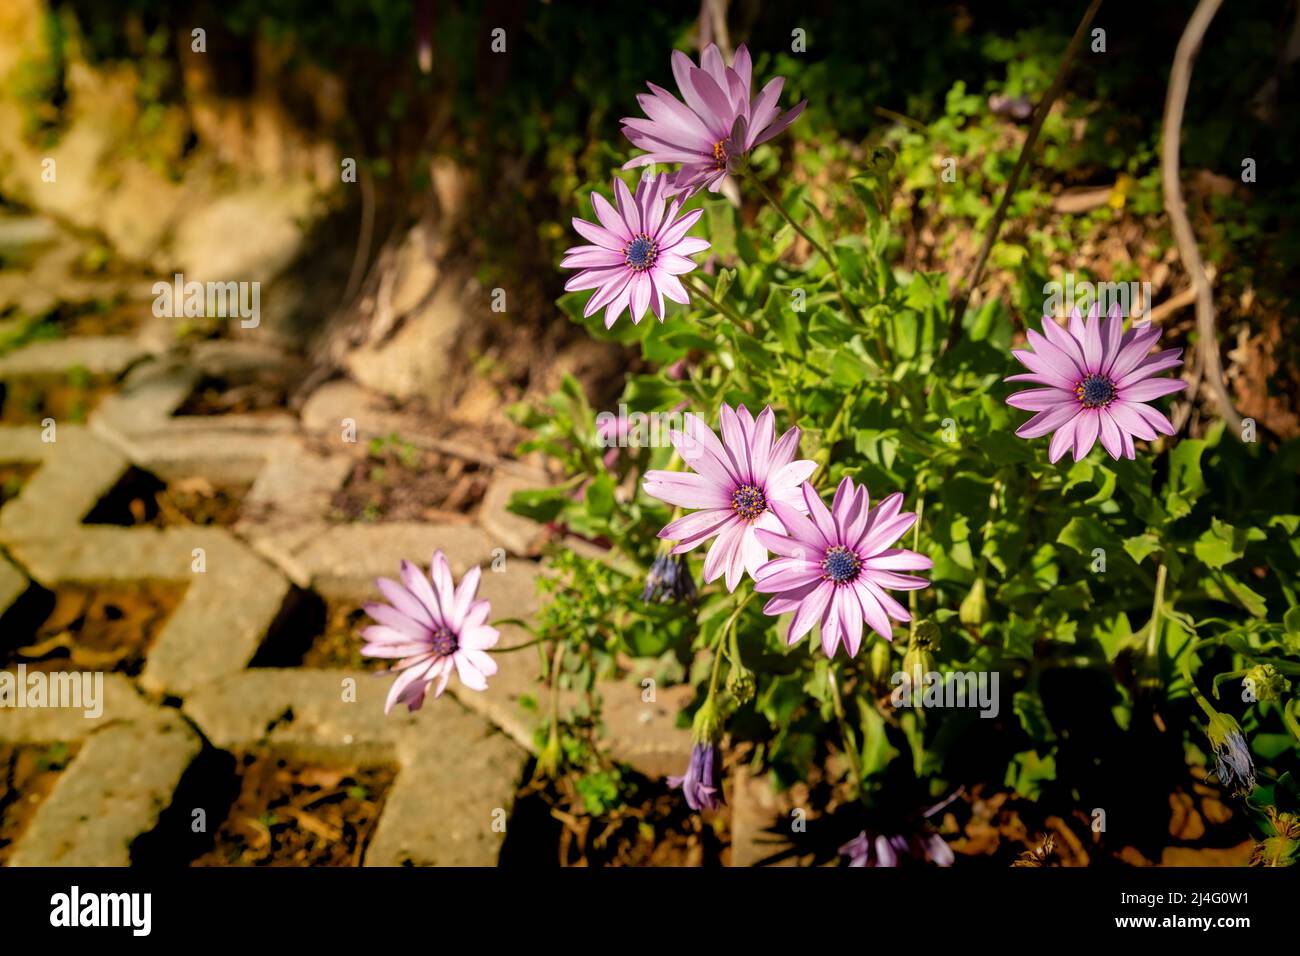 Selective focus beautiful close-up background photo of purple Osteospermum fruticosum flowers, also known as African chamomile. Stock Photo